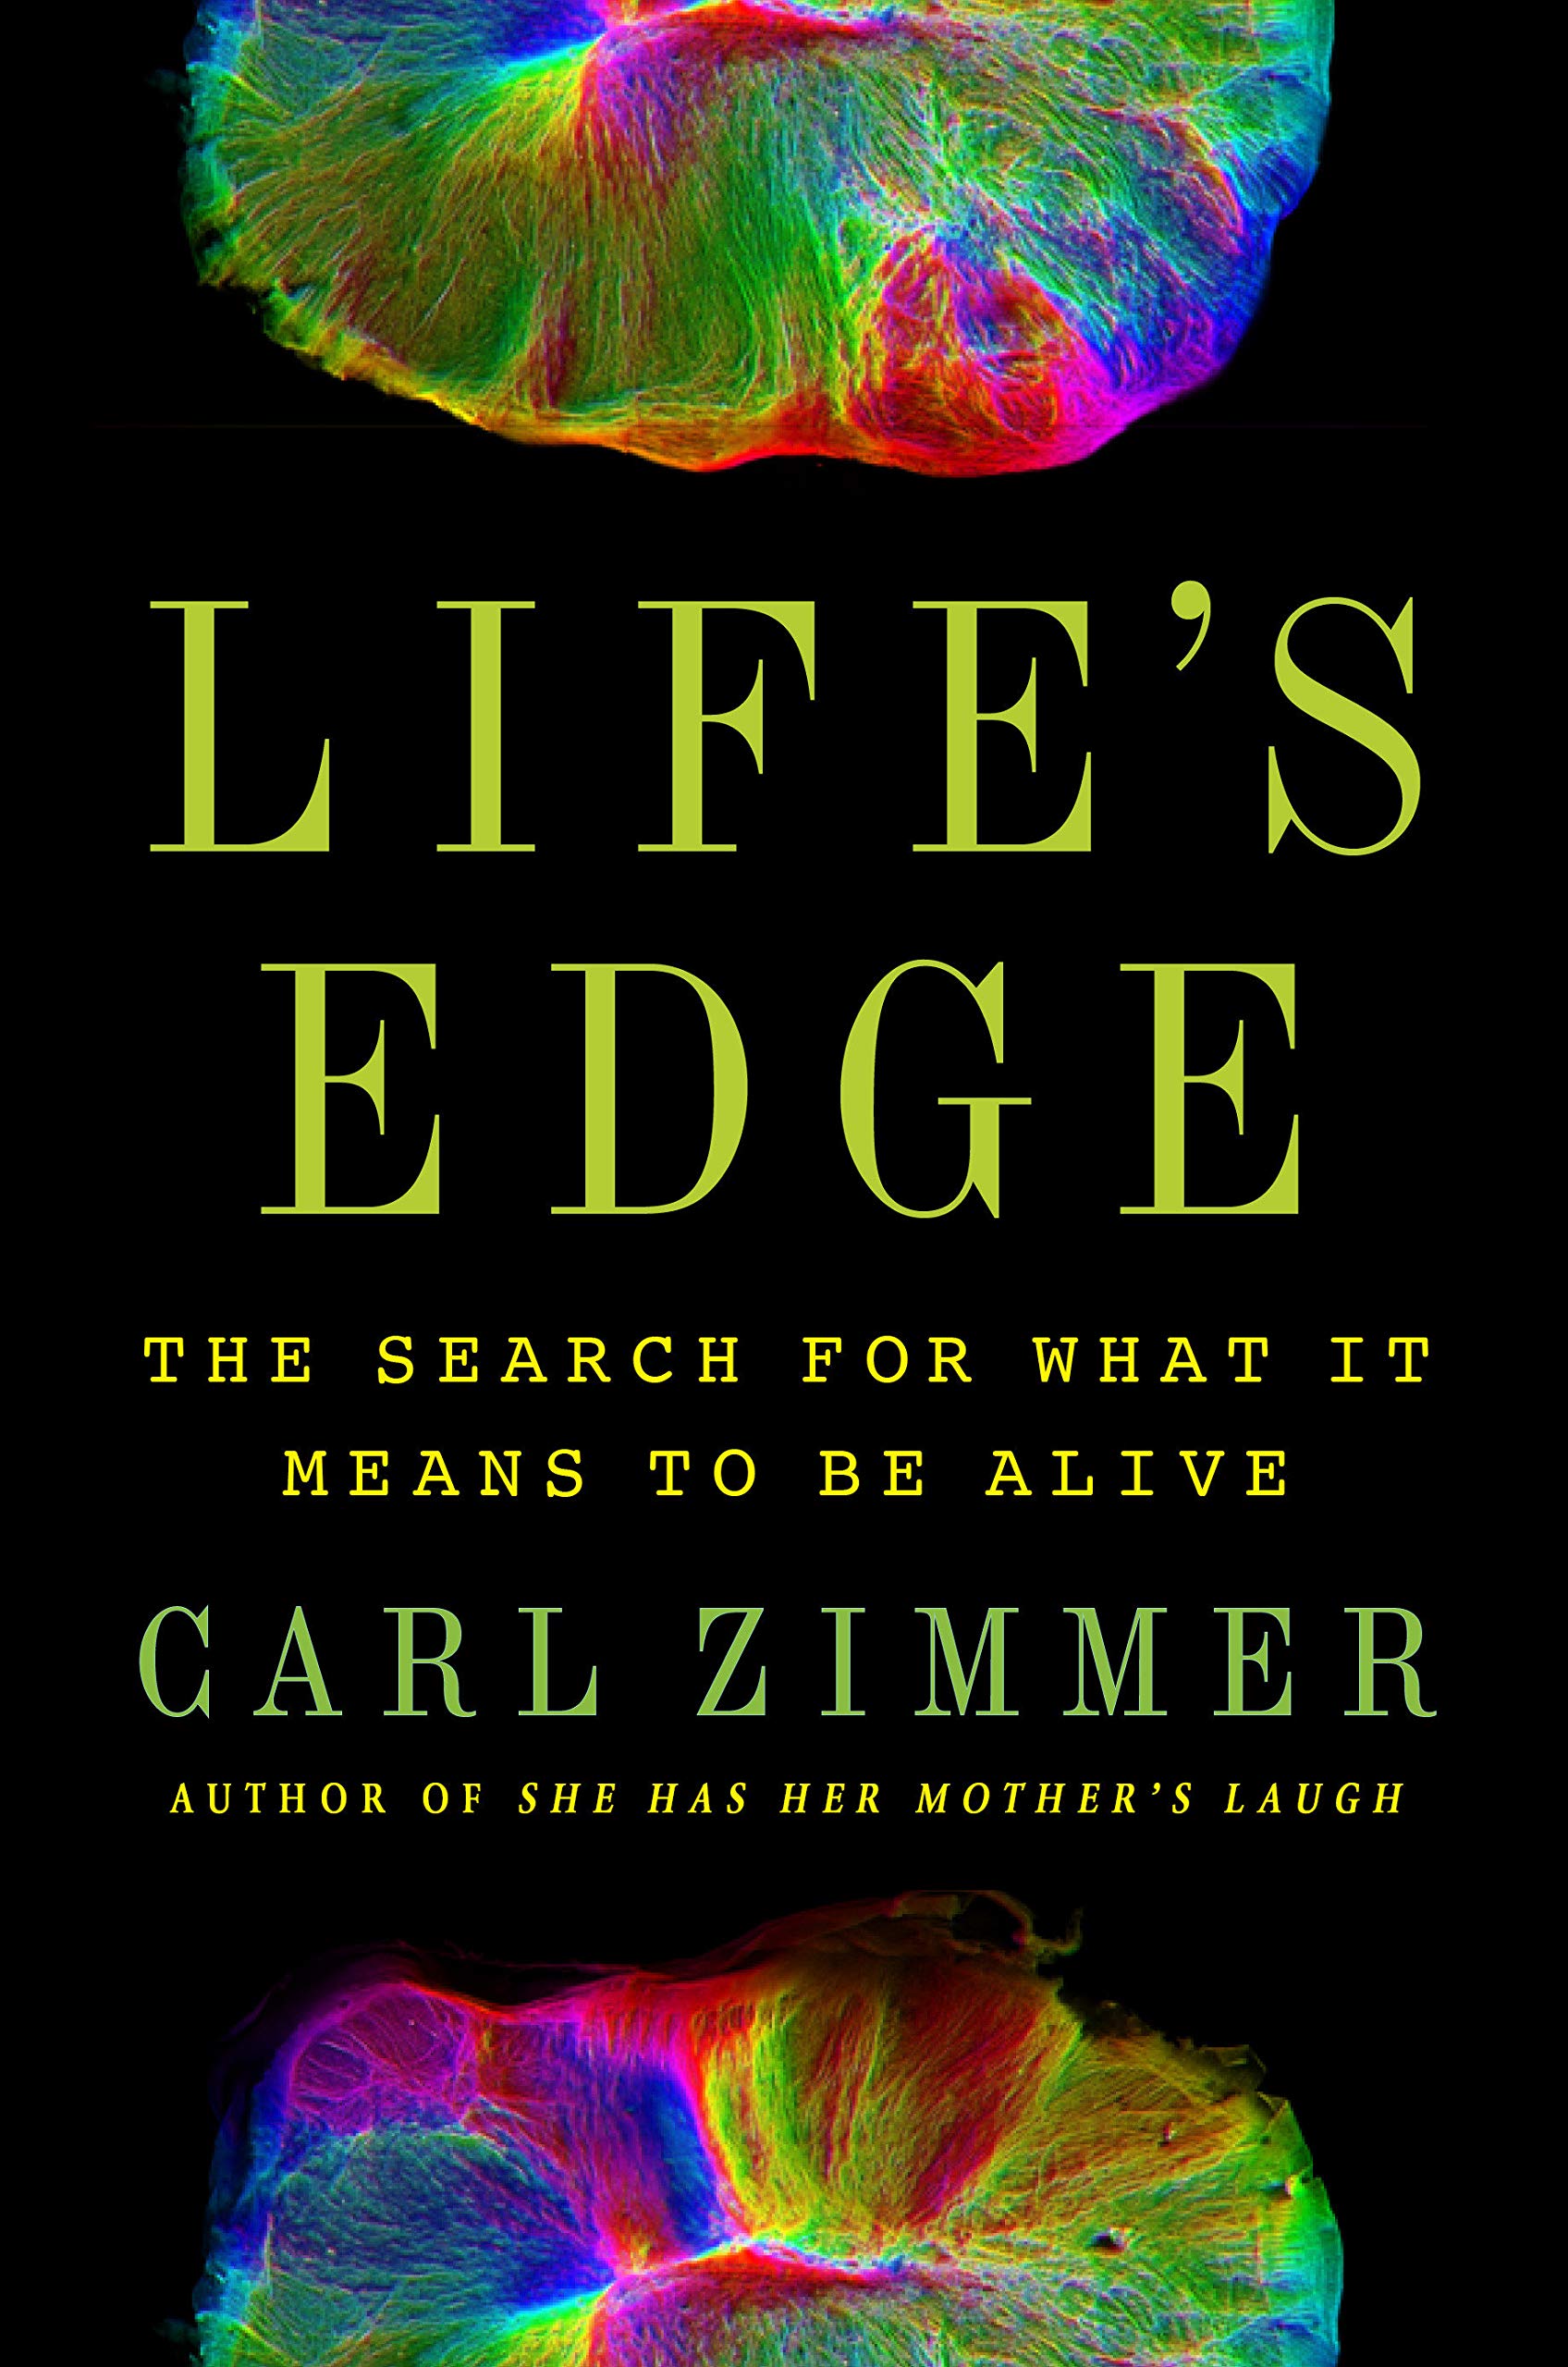 Image Life's edge : the search for what it means to be alive